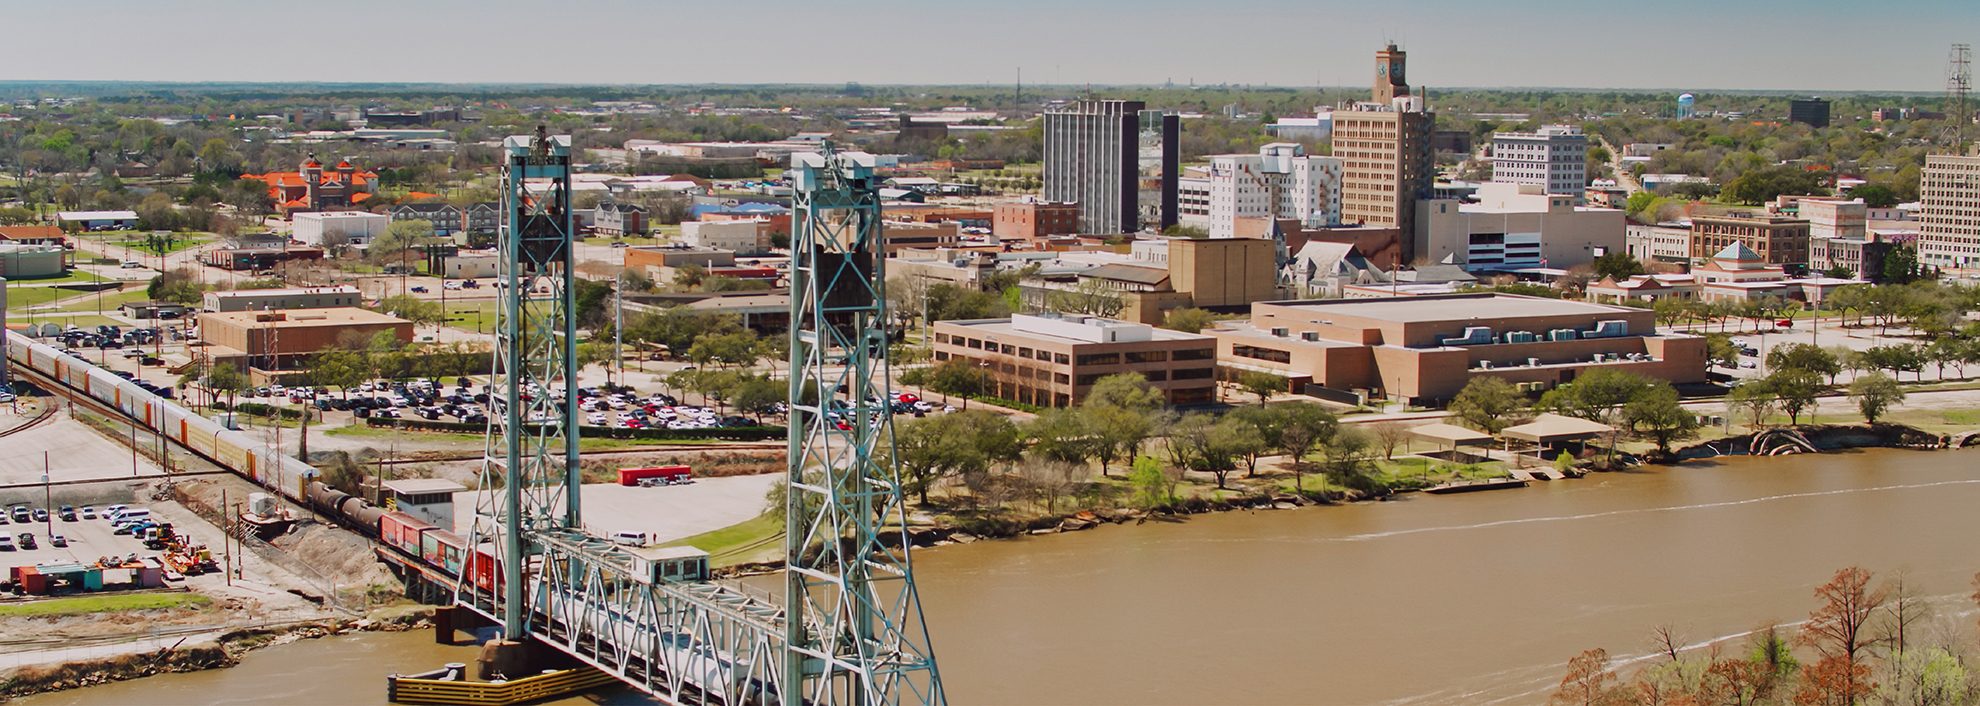 Aerial View of Beaumont, Texas